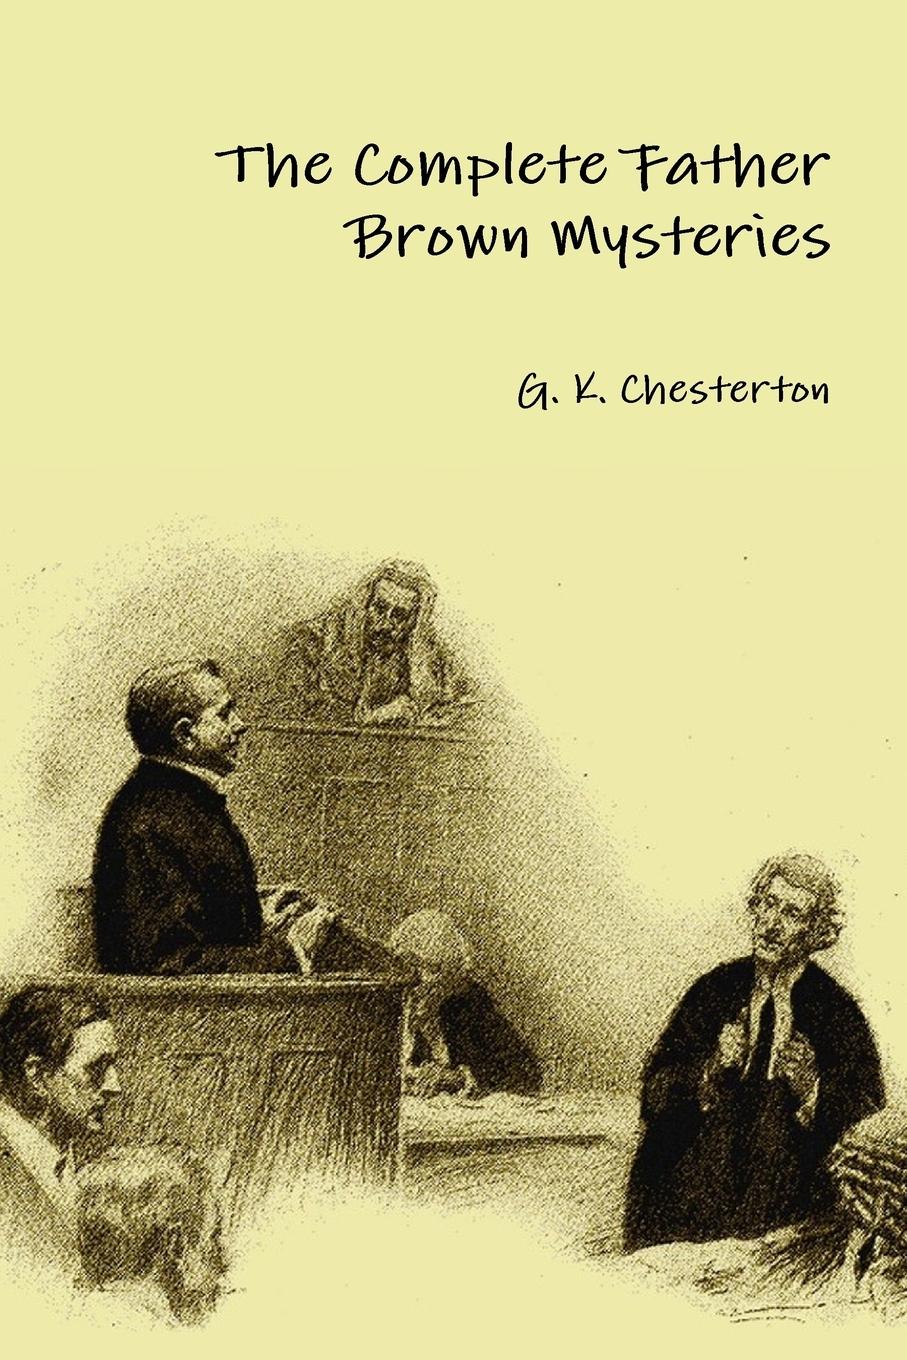 The Complete Father Brown Mysteries - Chesterton, G. K.